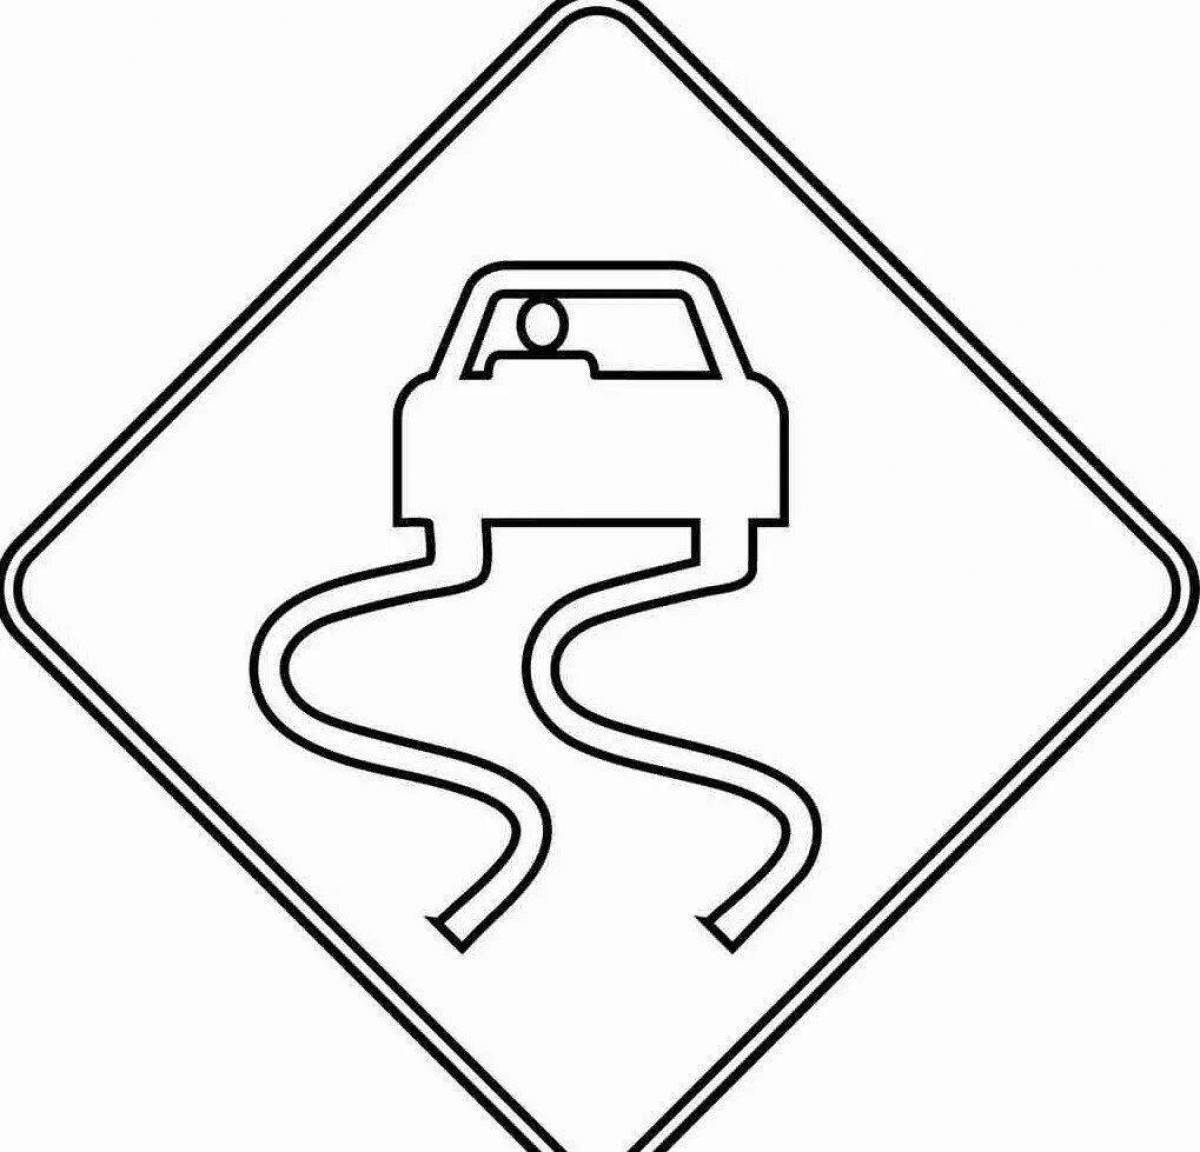 Fun parking road sign coloring page